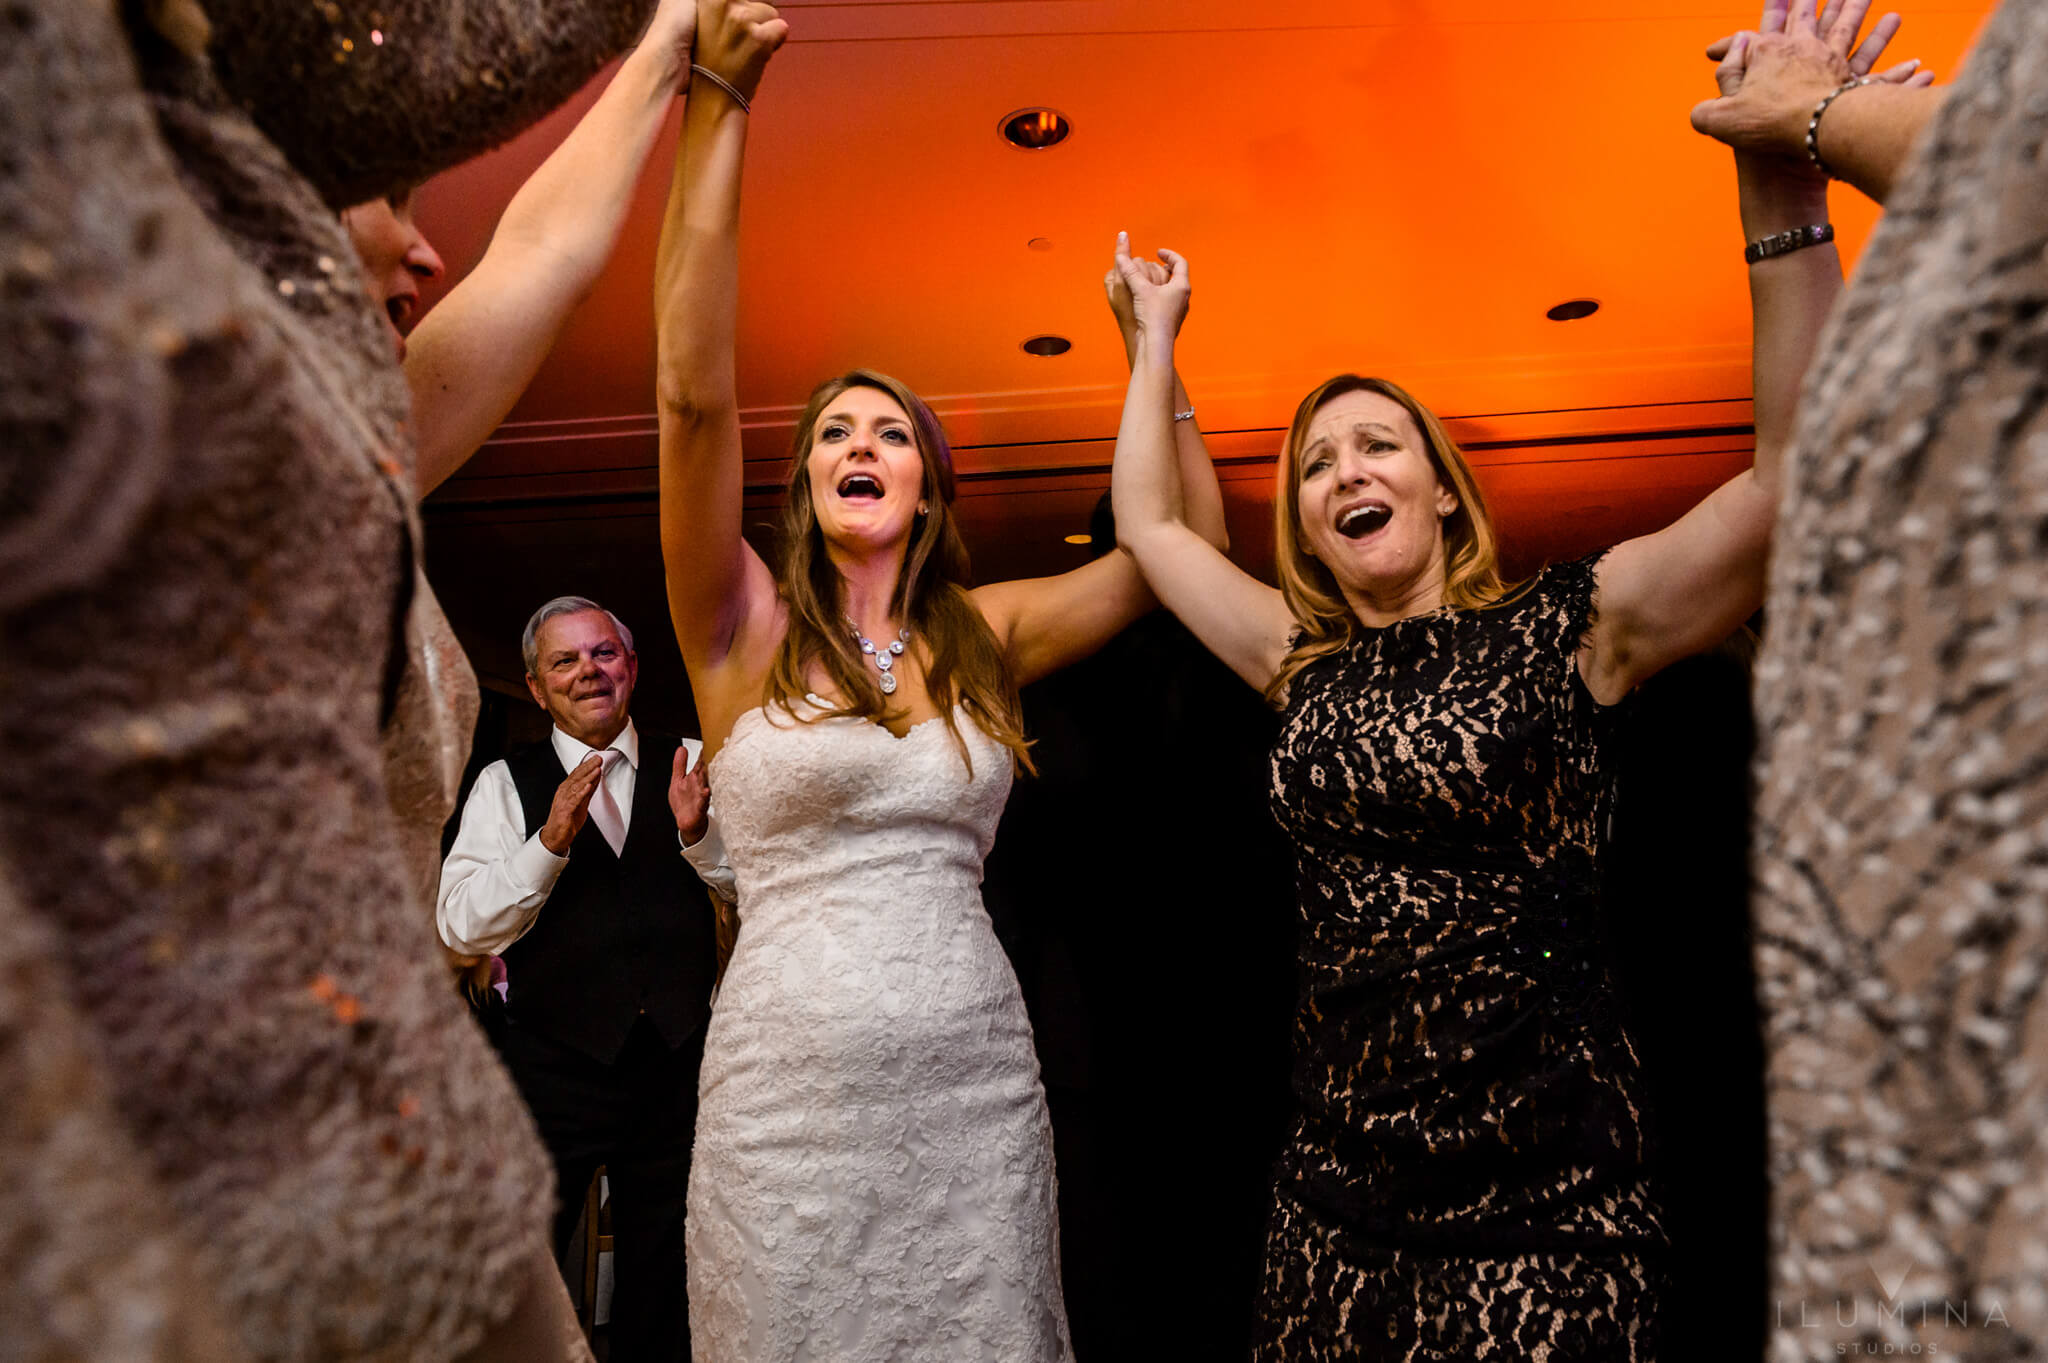 Color photo of bride holding hands and singing with friends on dance floor at Vail, Colorado wedding